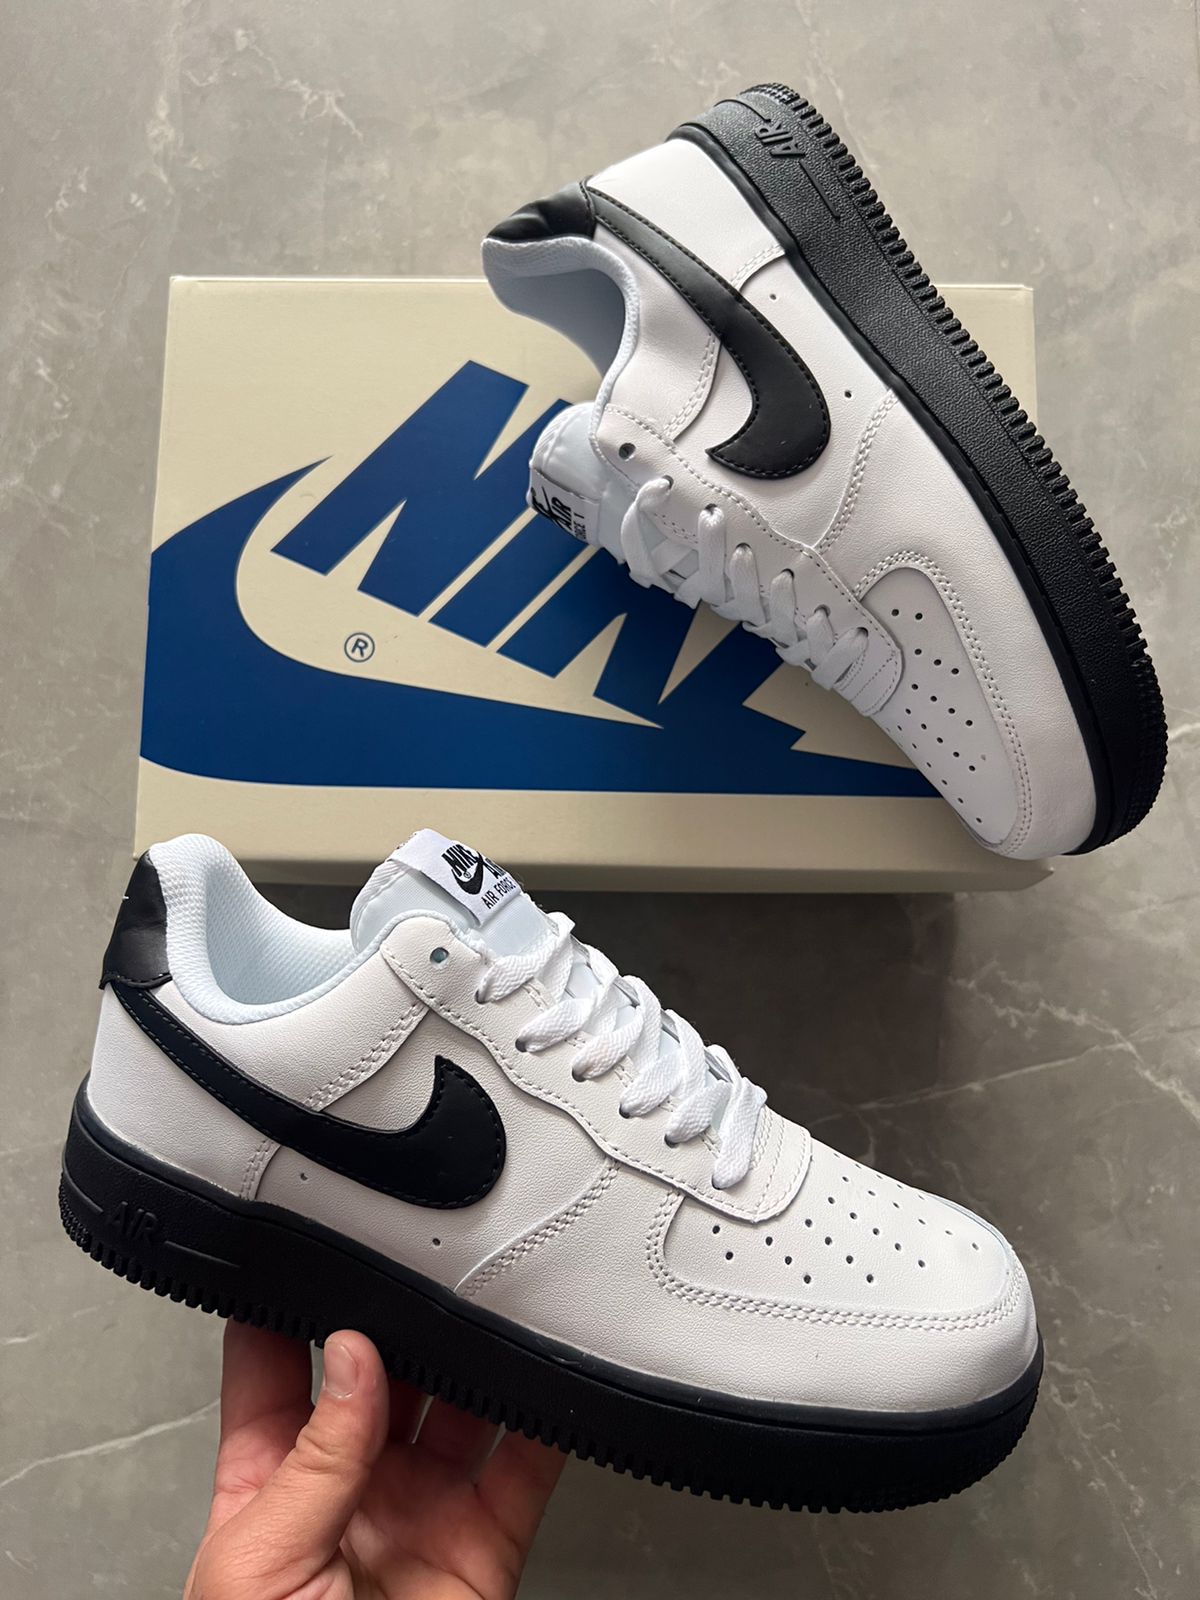 Airforce White Black Leather Quality Grtd